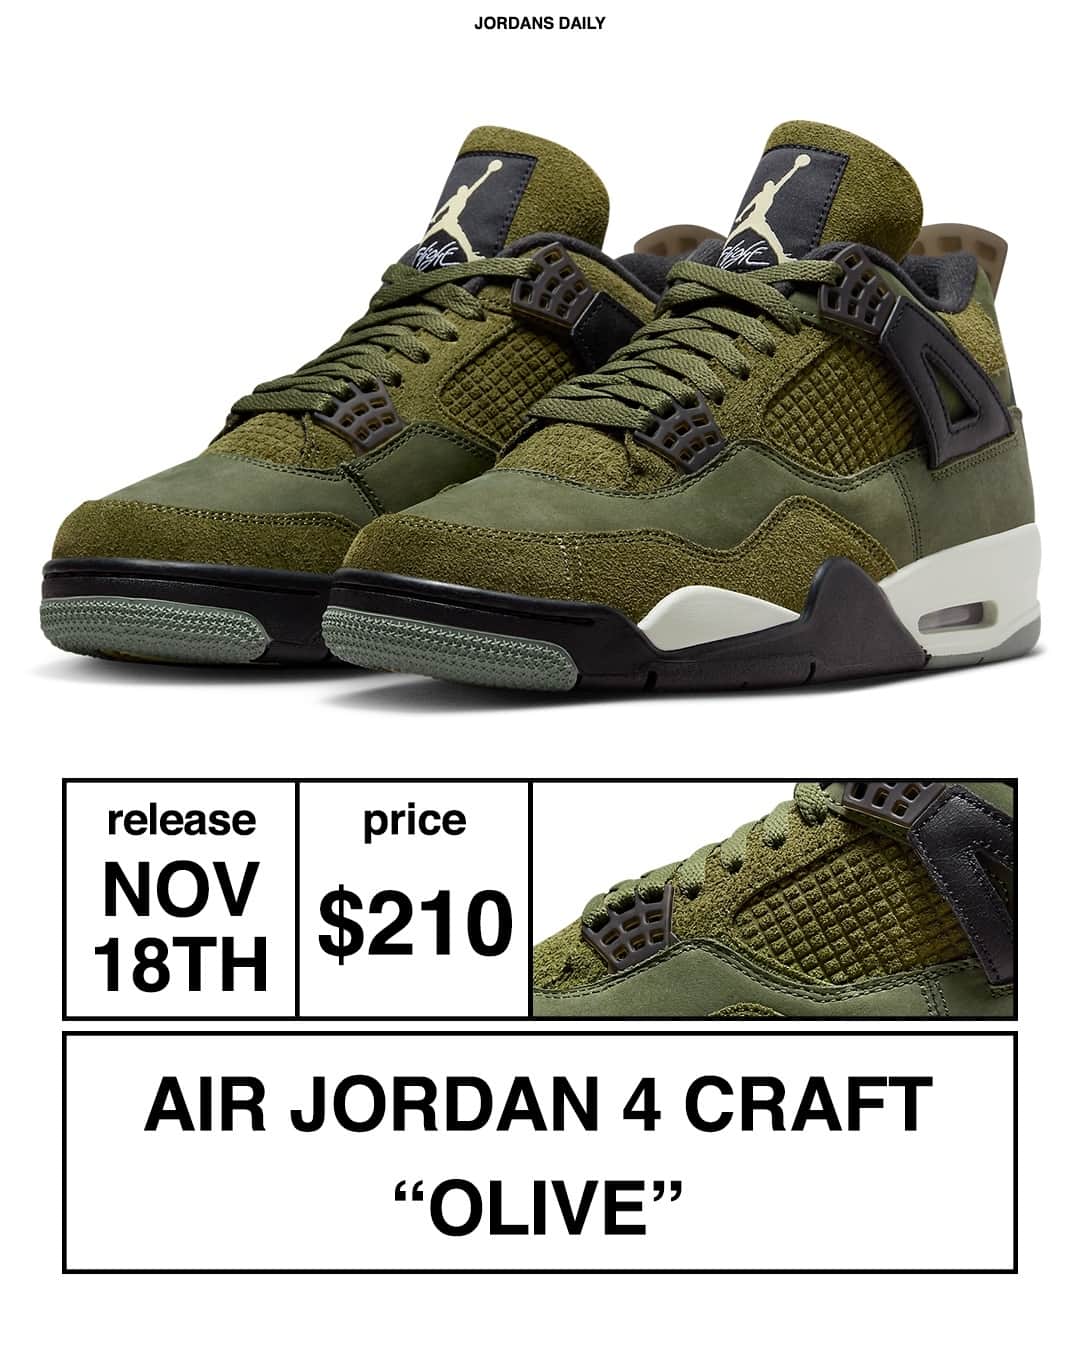 Sneaker News x Jordans Dailyのインスタグラム：「The Air Jordan 4 Craft "Olive" is dropping later this month 👀 For more details as well as a look at the official images, tap the link in the bio!」